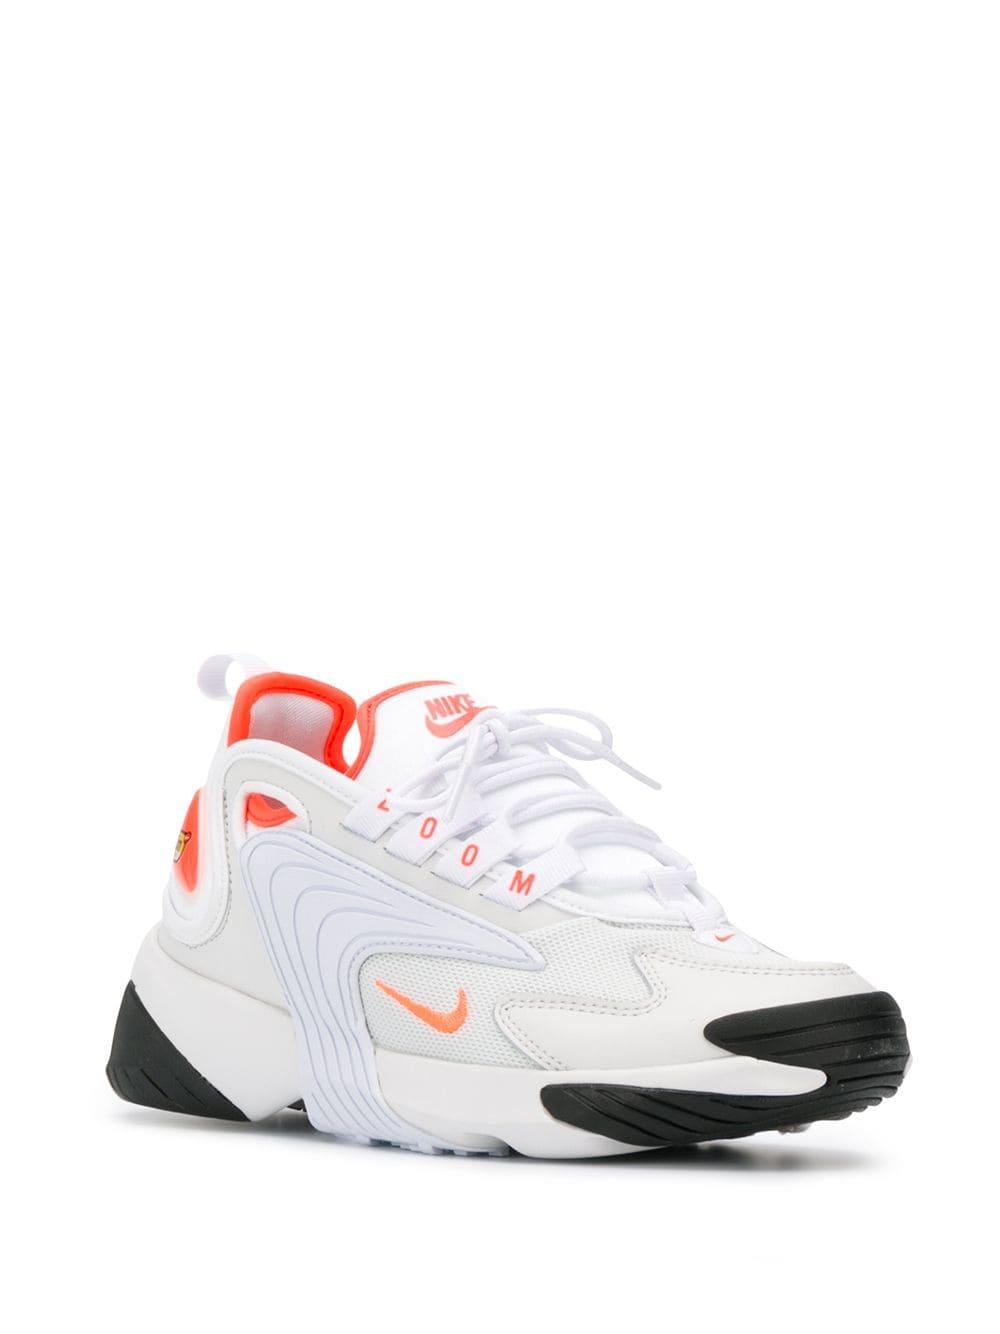 Nike Off-white And Orange Zoom 2k Sneakers Lyst